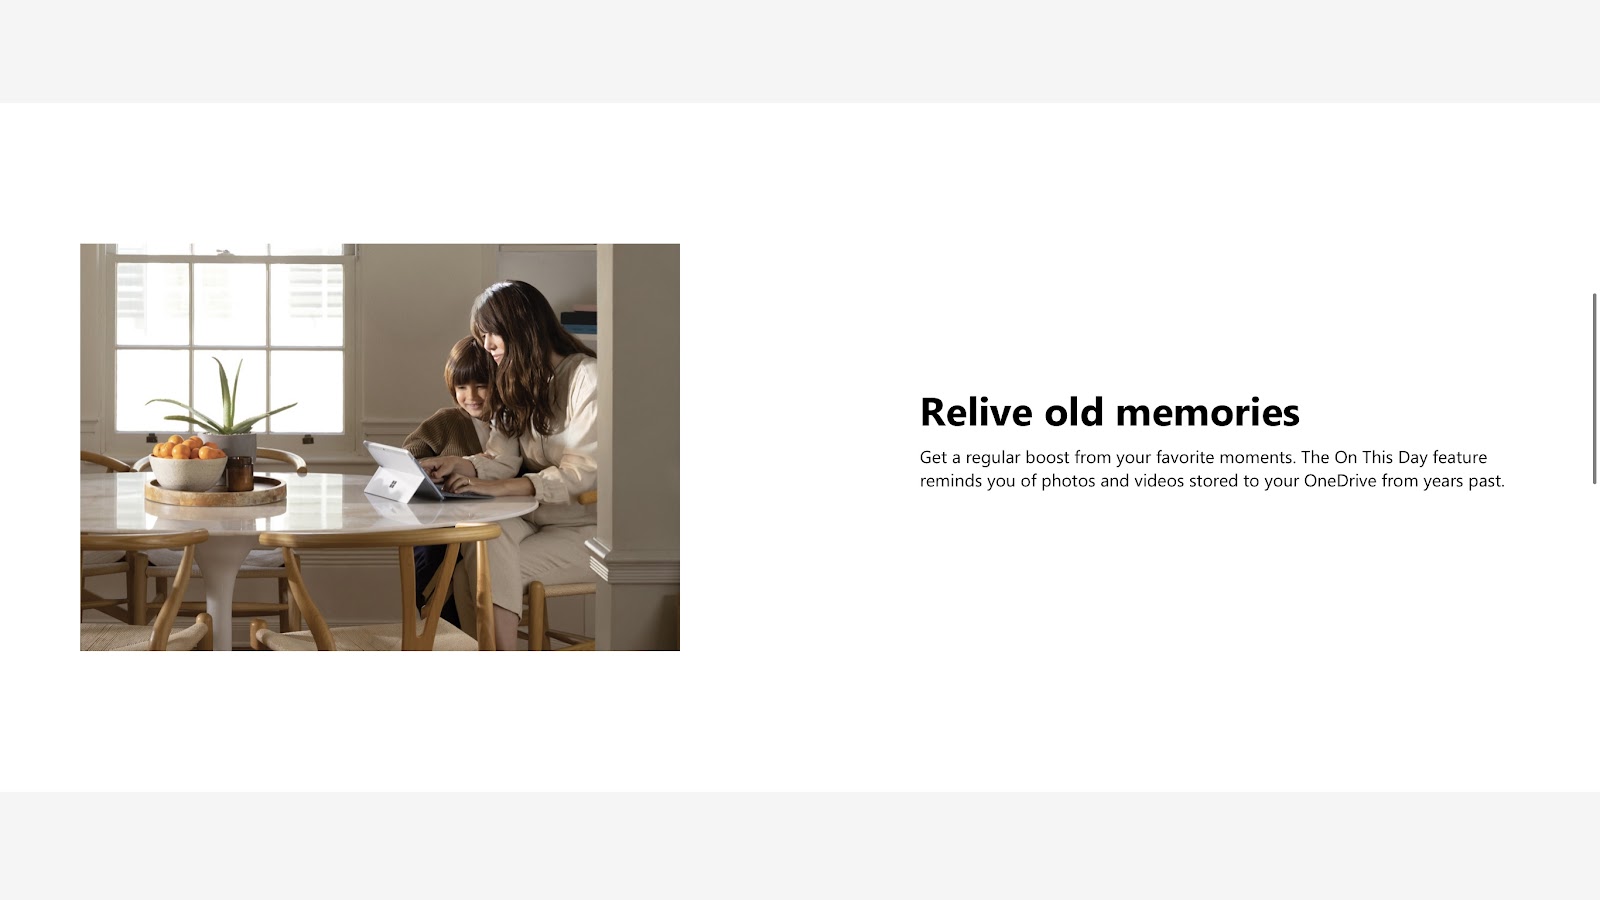 OneDrive's webpage discussing its On This Day feature